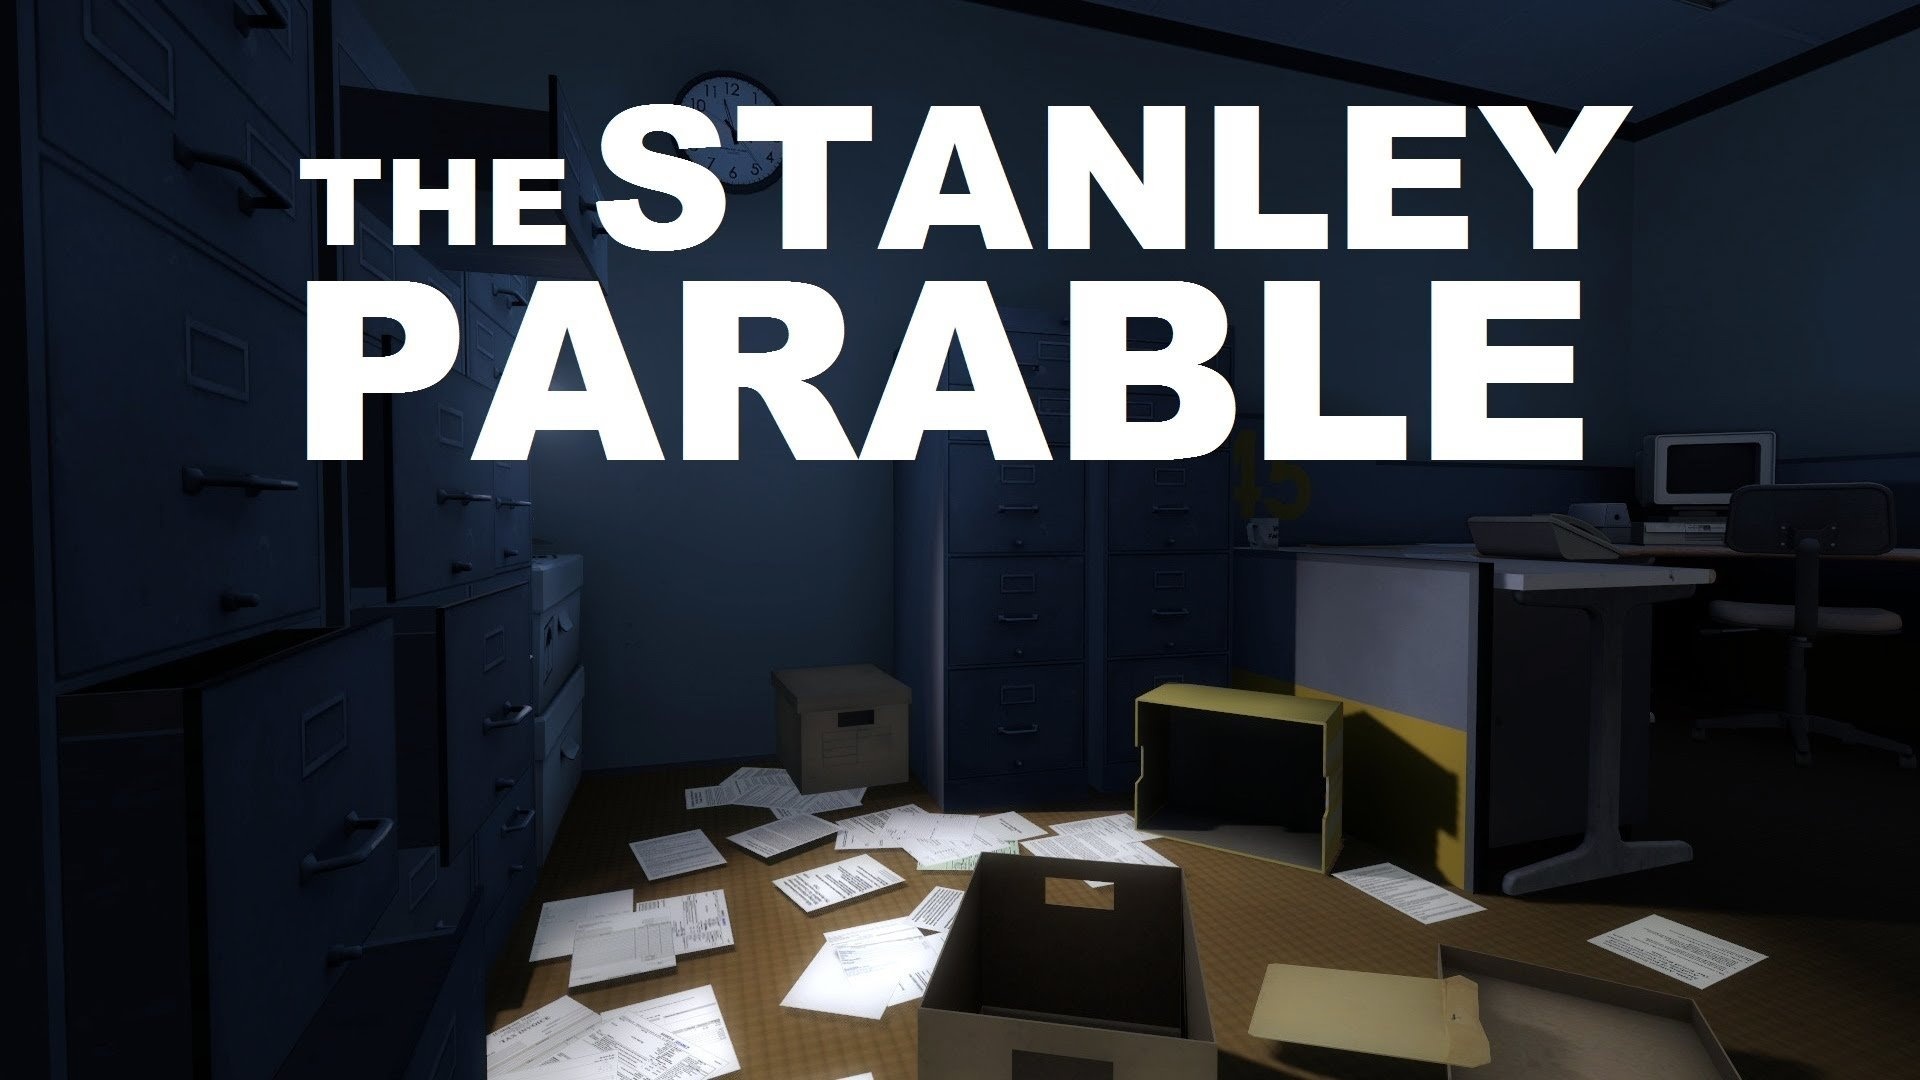 The Stanley Parable Ultra Deluxe: The Mariella Ending, The Insane Ending, The Meeting Room. 1920x1080 Full HD Wallpaper.